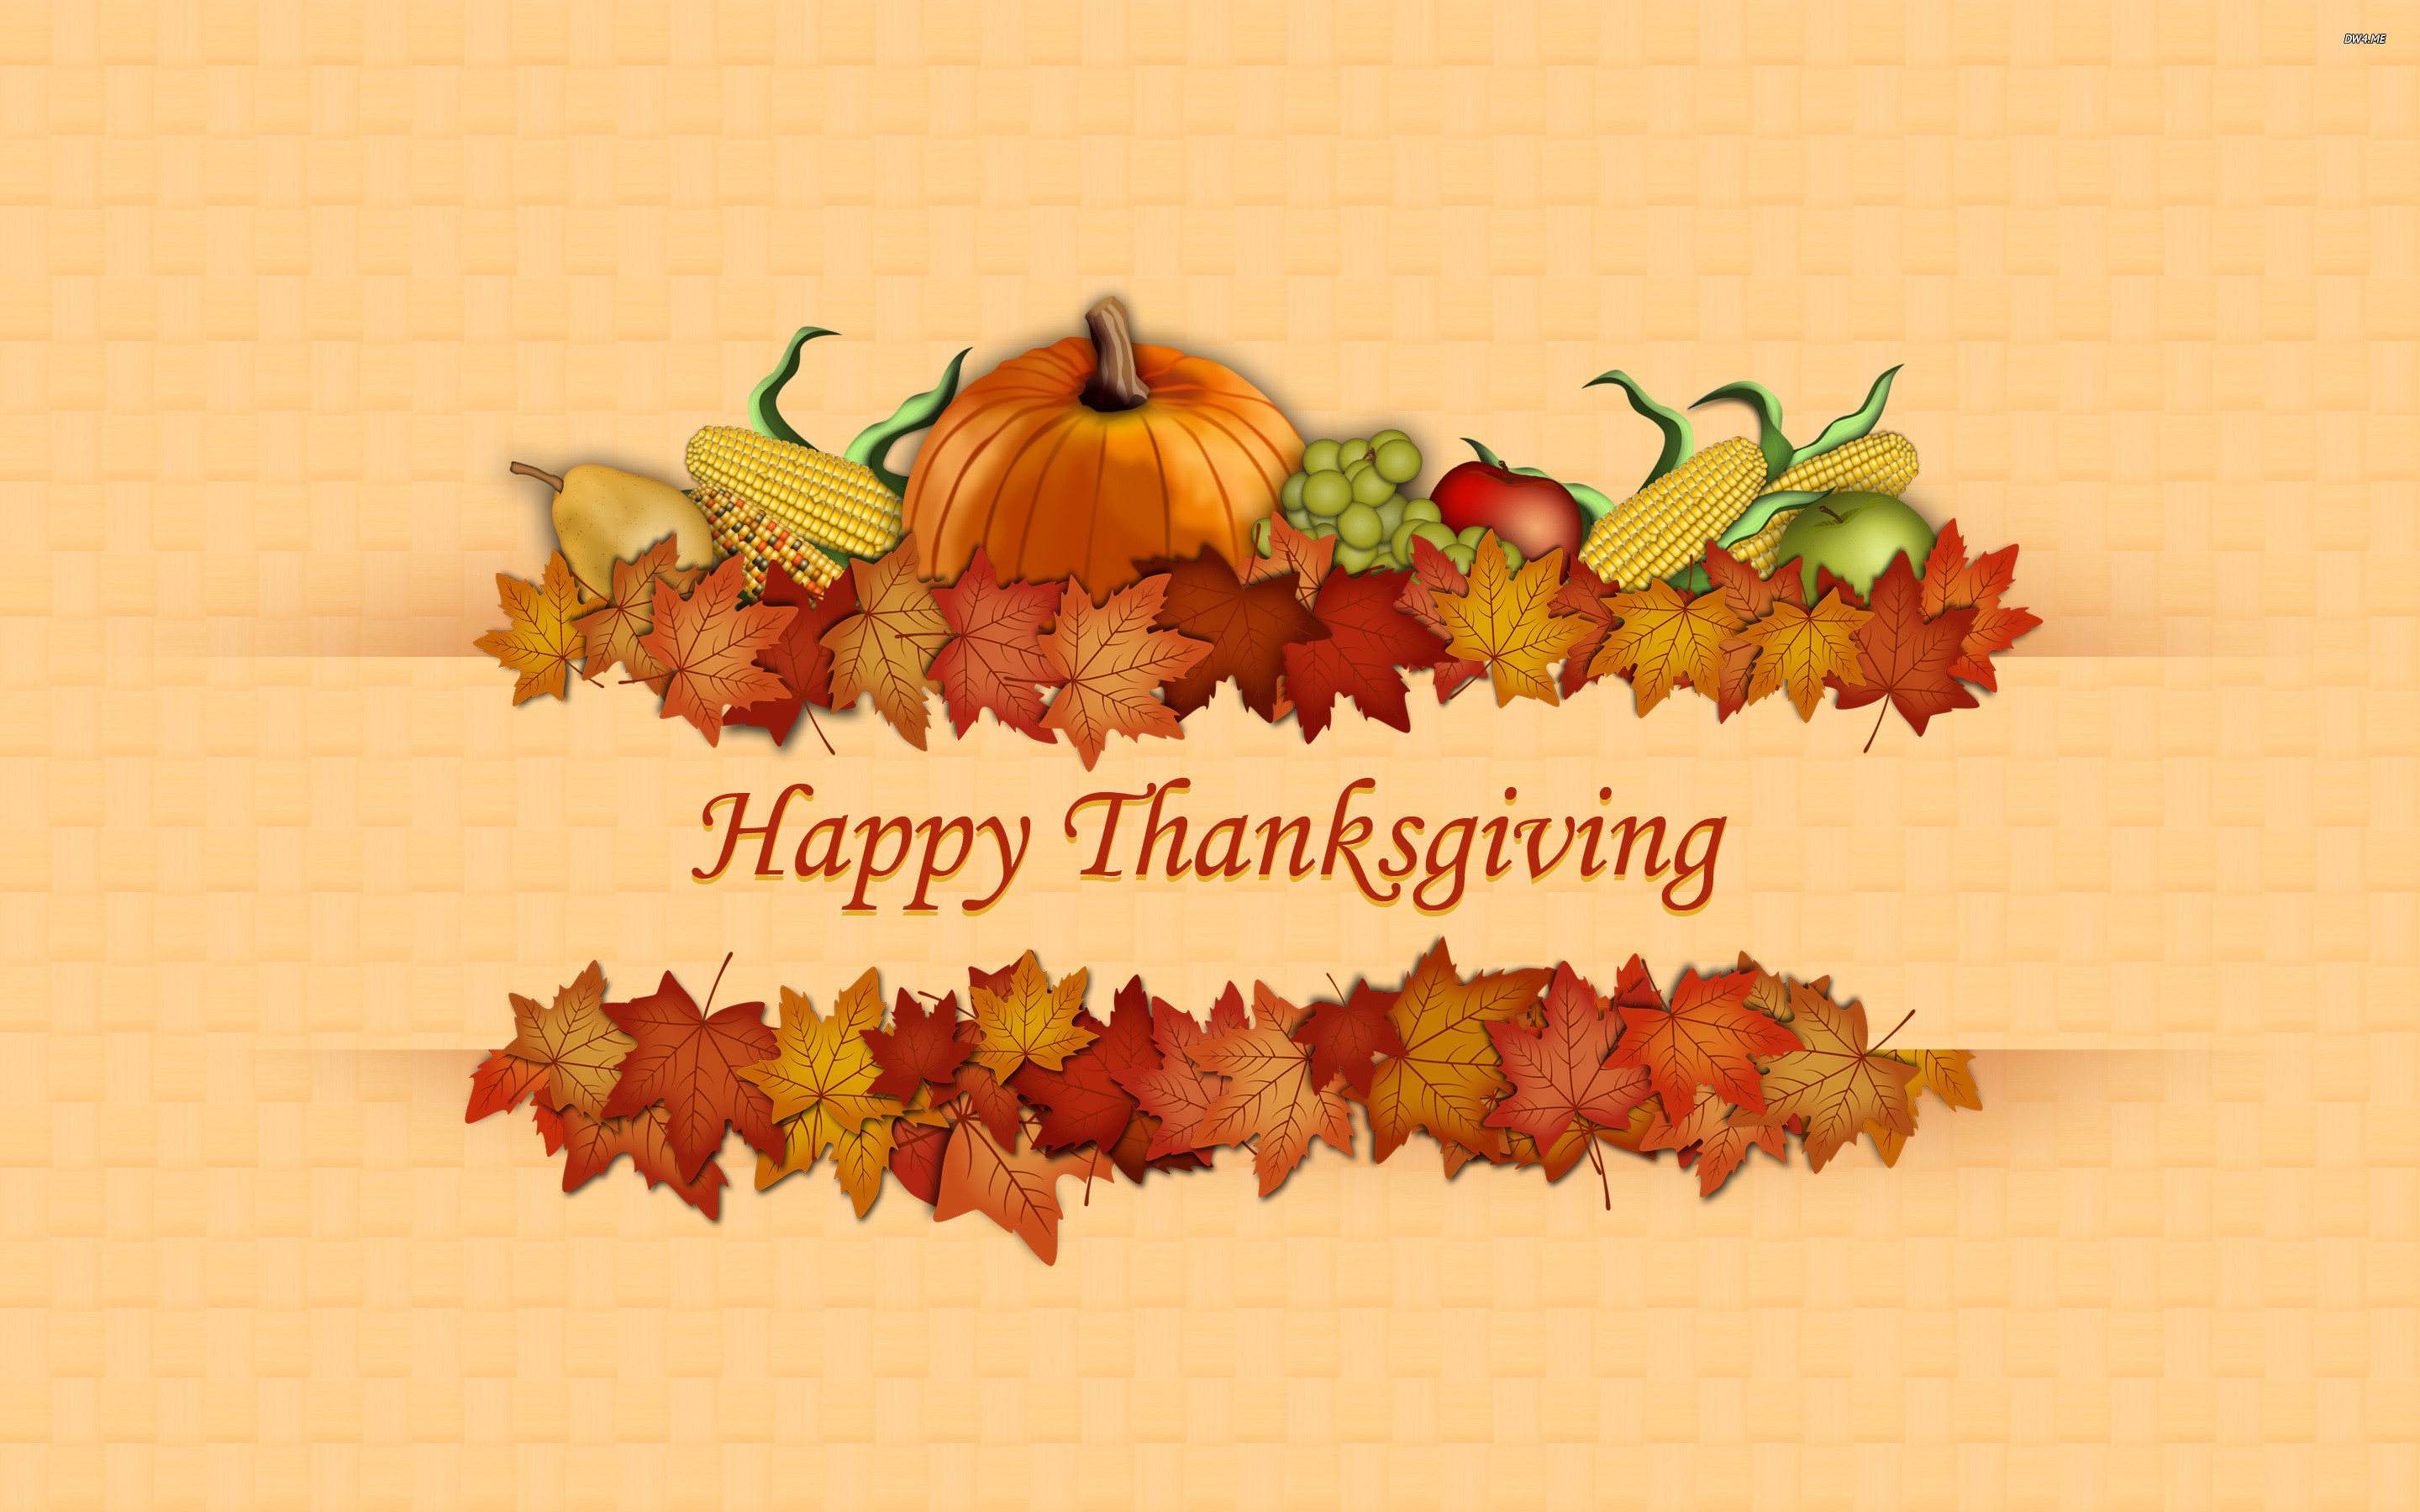 2521 Thanksgiving Wallpaper Stock Photos HighRes Pictures and Images   Getty Images